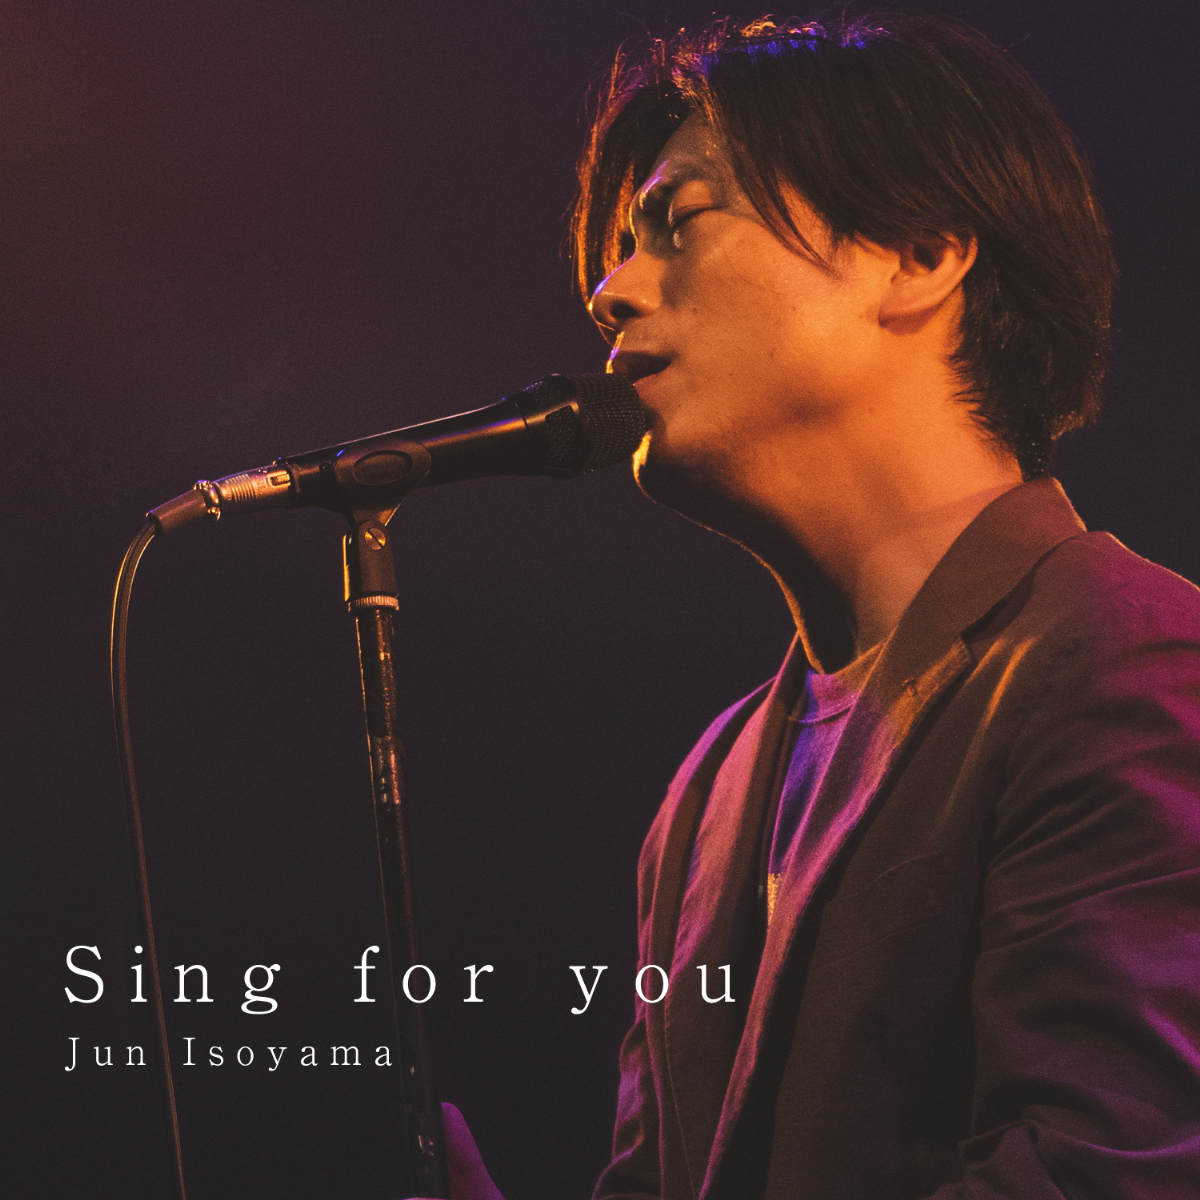 『Sing for you』ジャケット